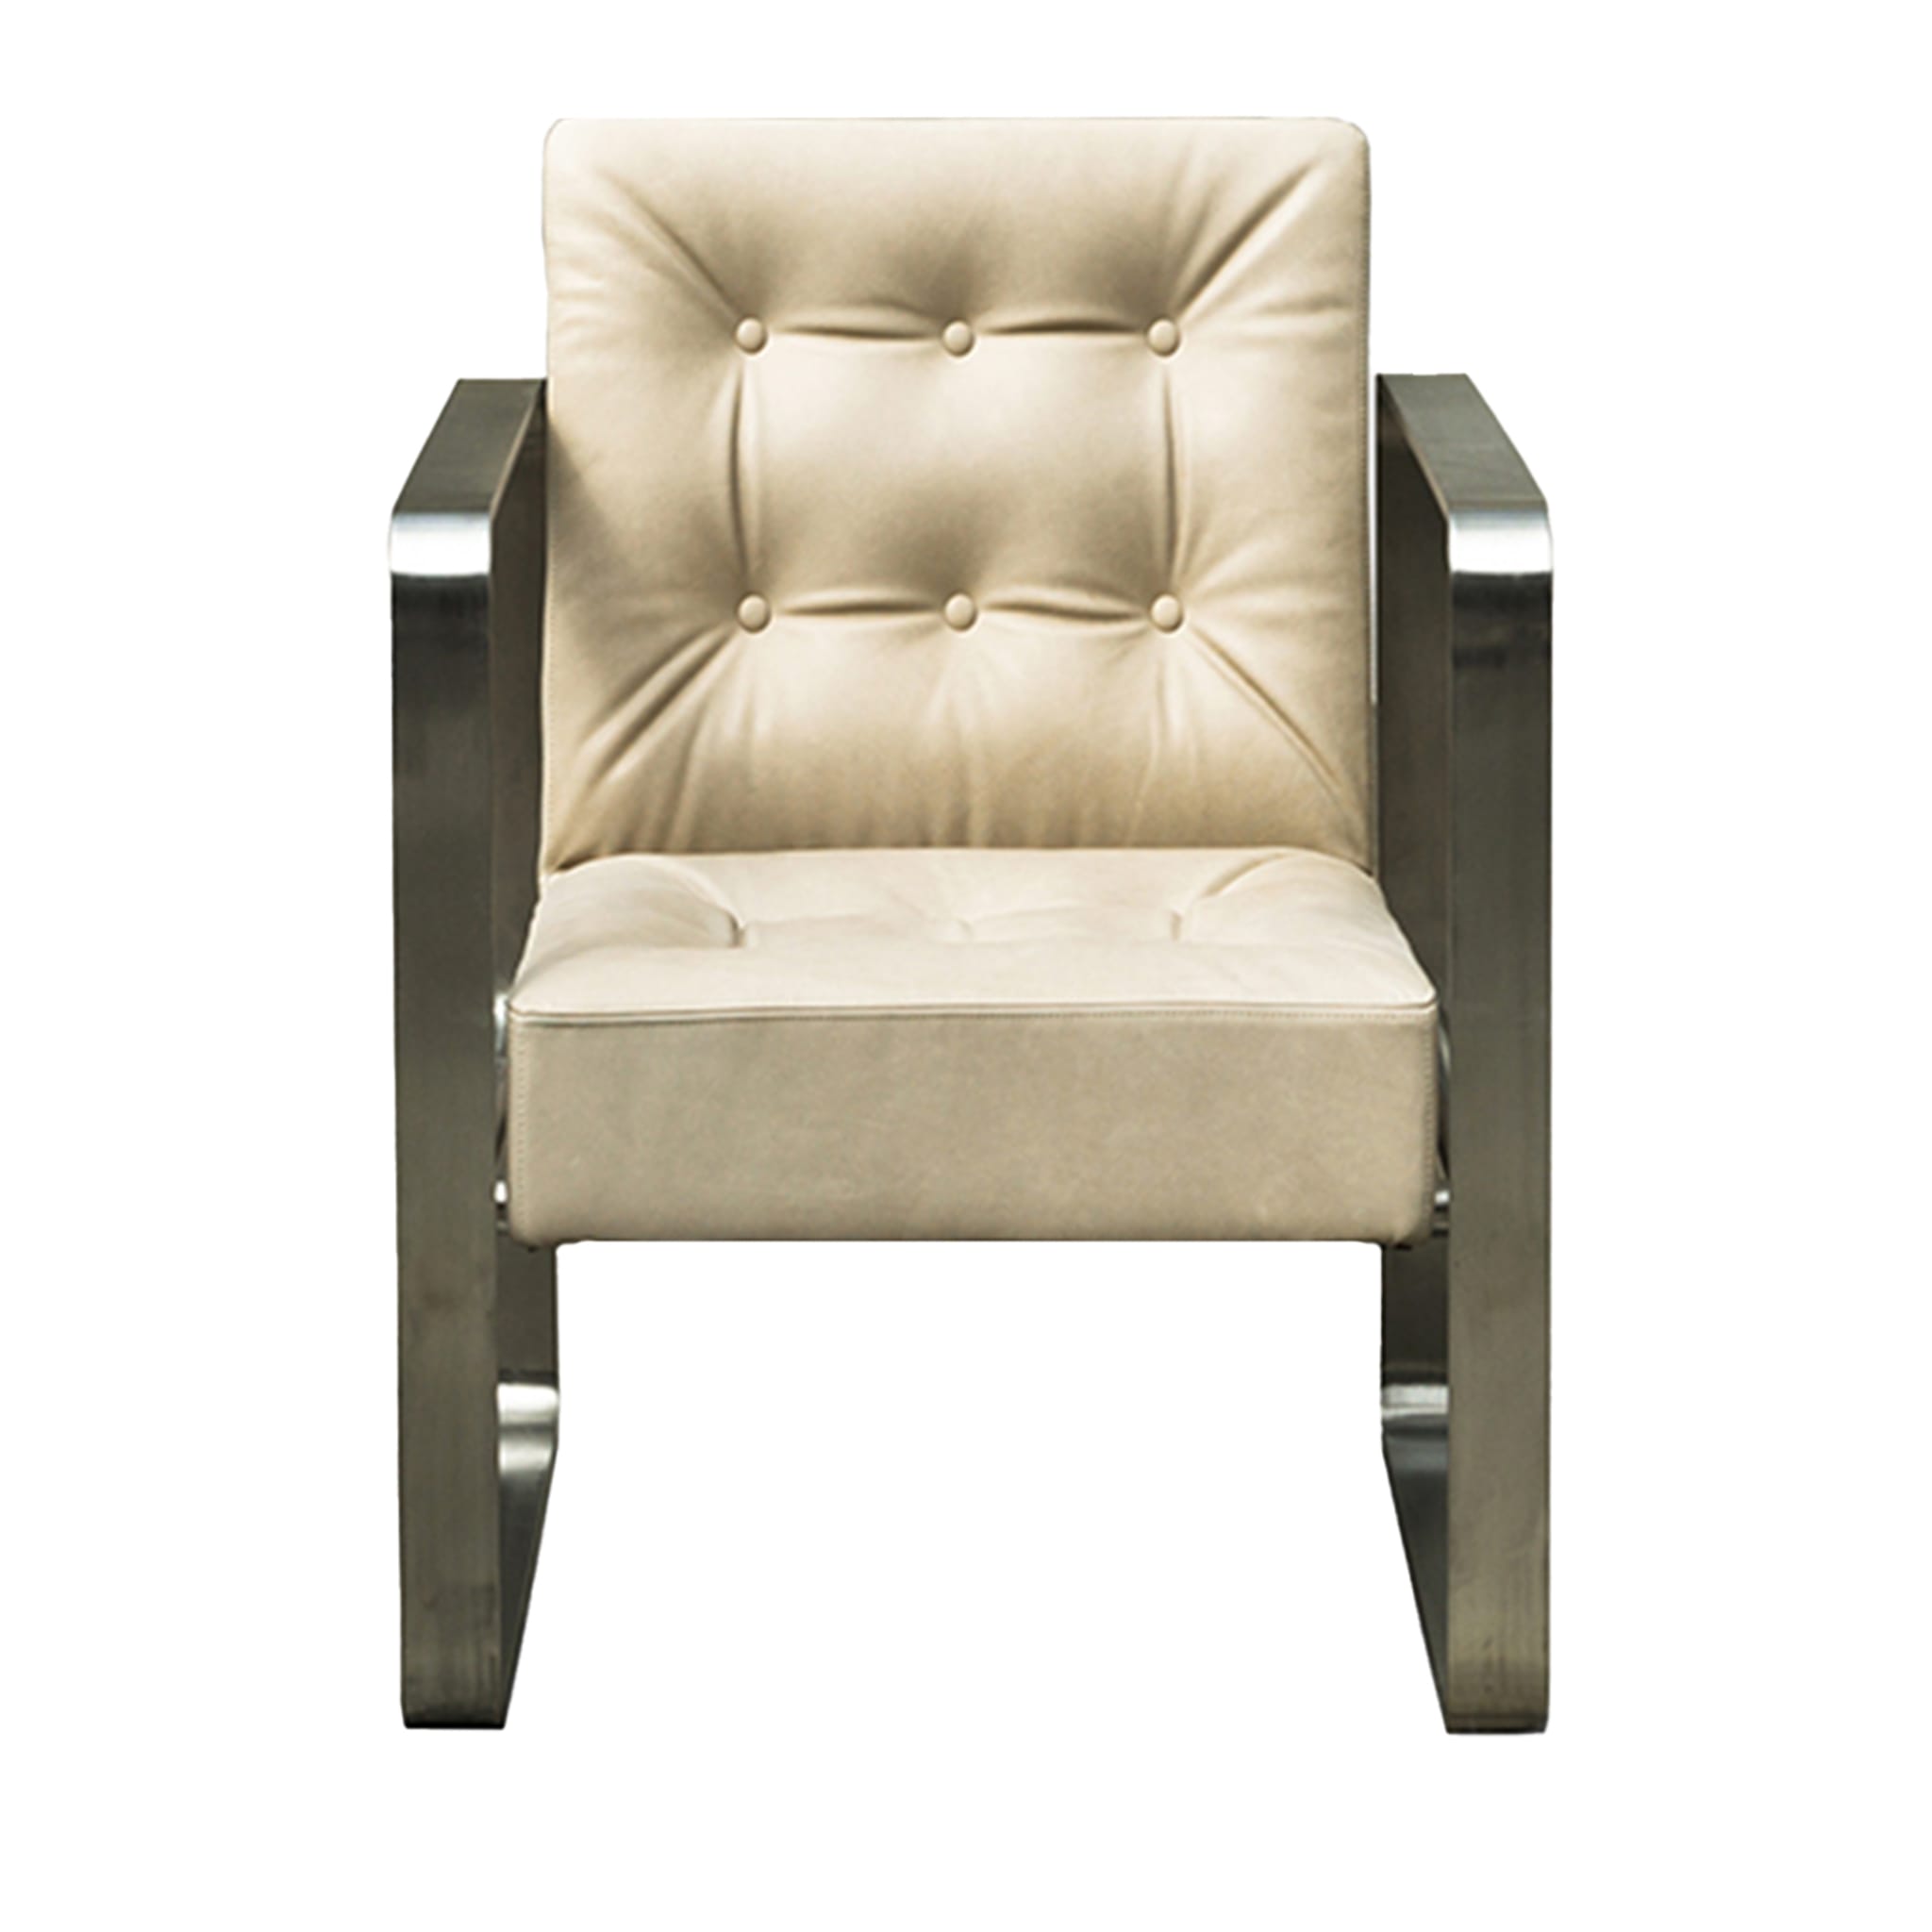 T33 Armchair by Franco Albini - Main view